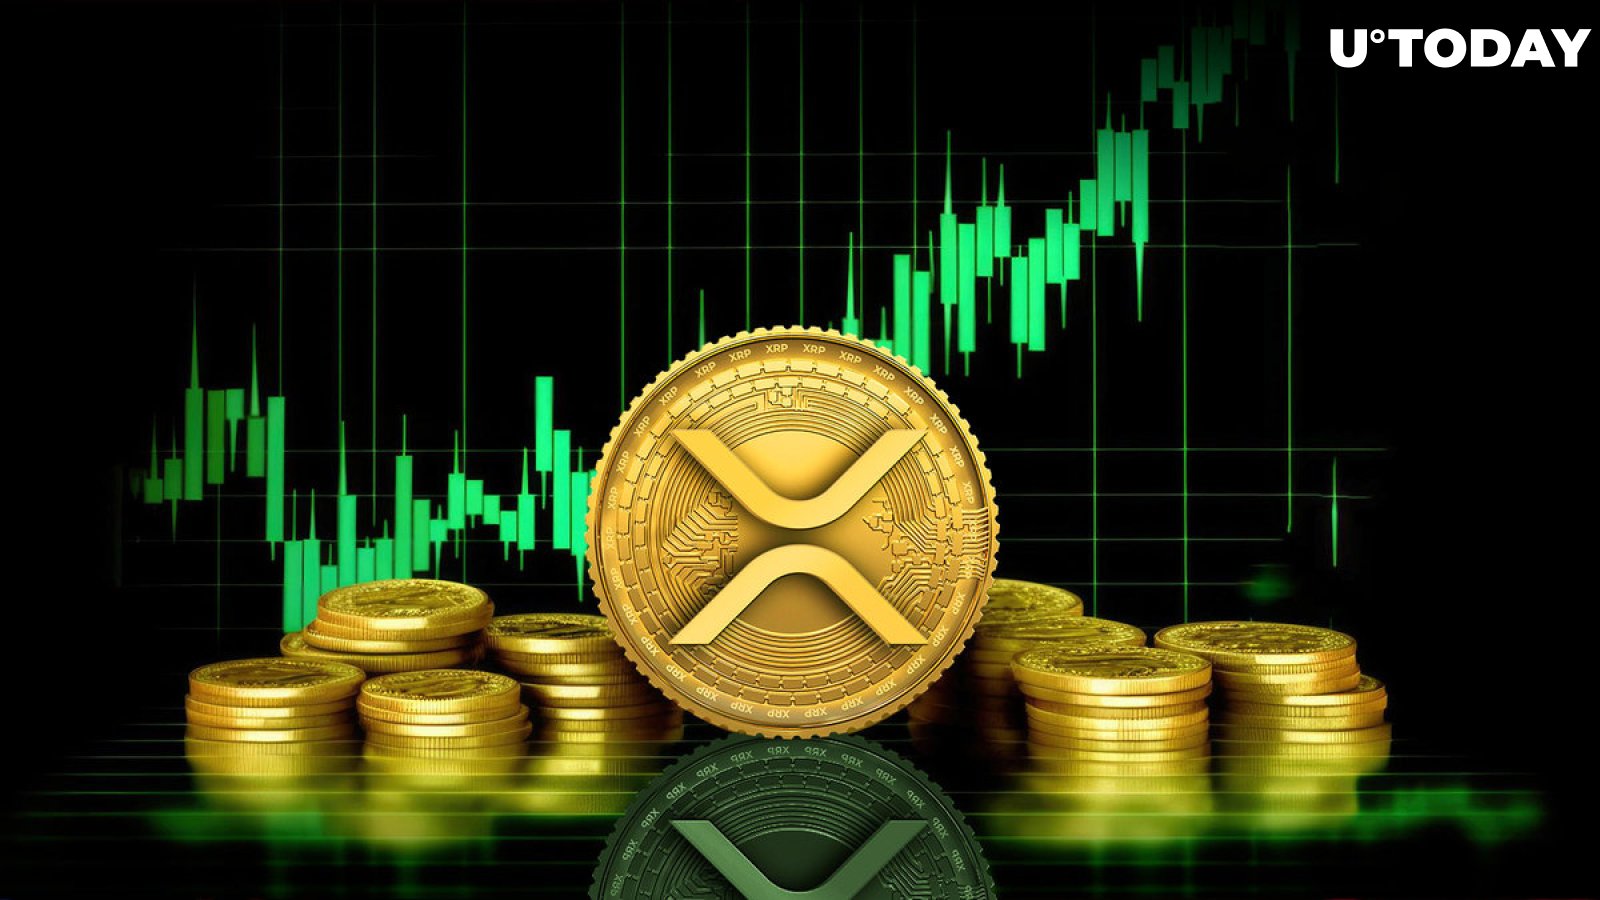 XRP Metric Sees 94% Jump as Traders Take Bets on Price